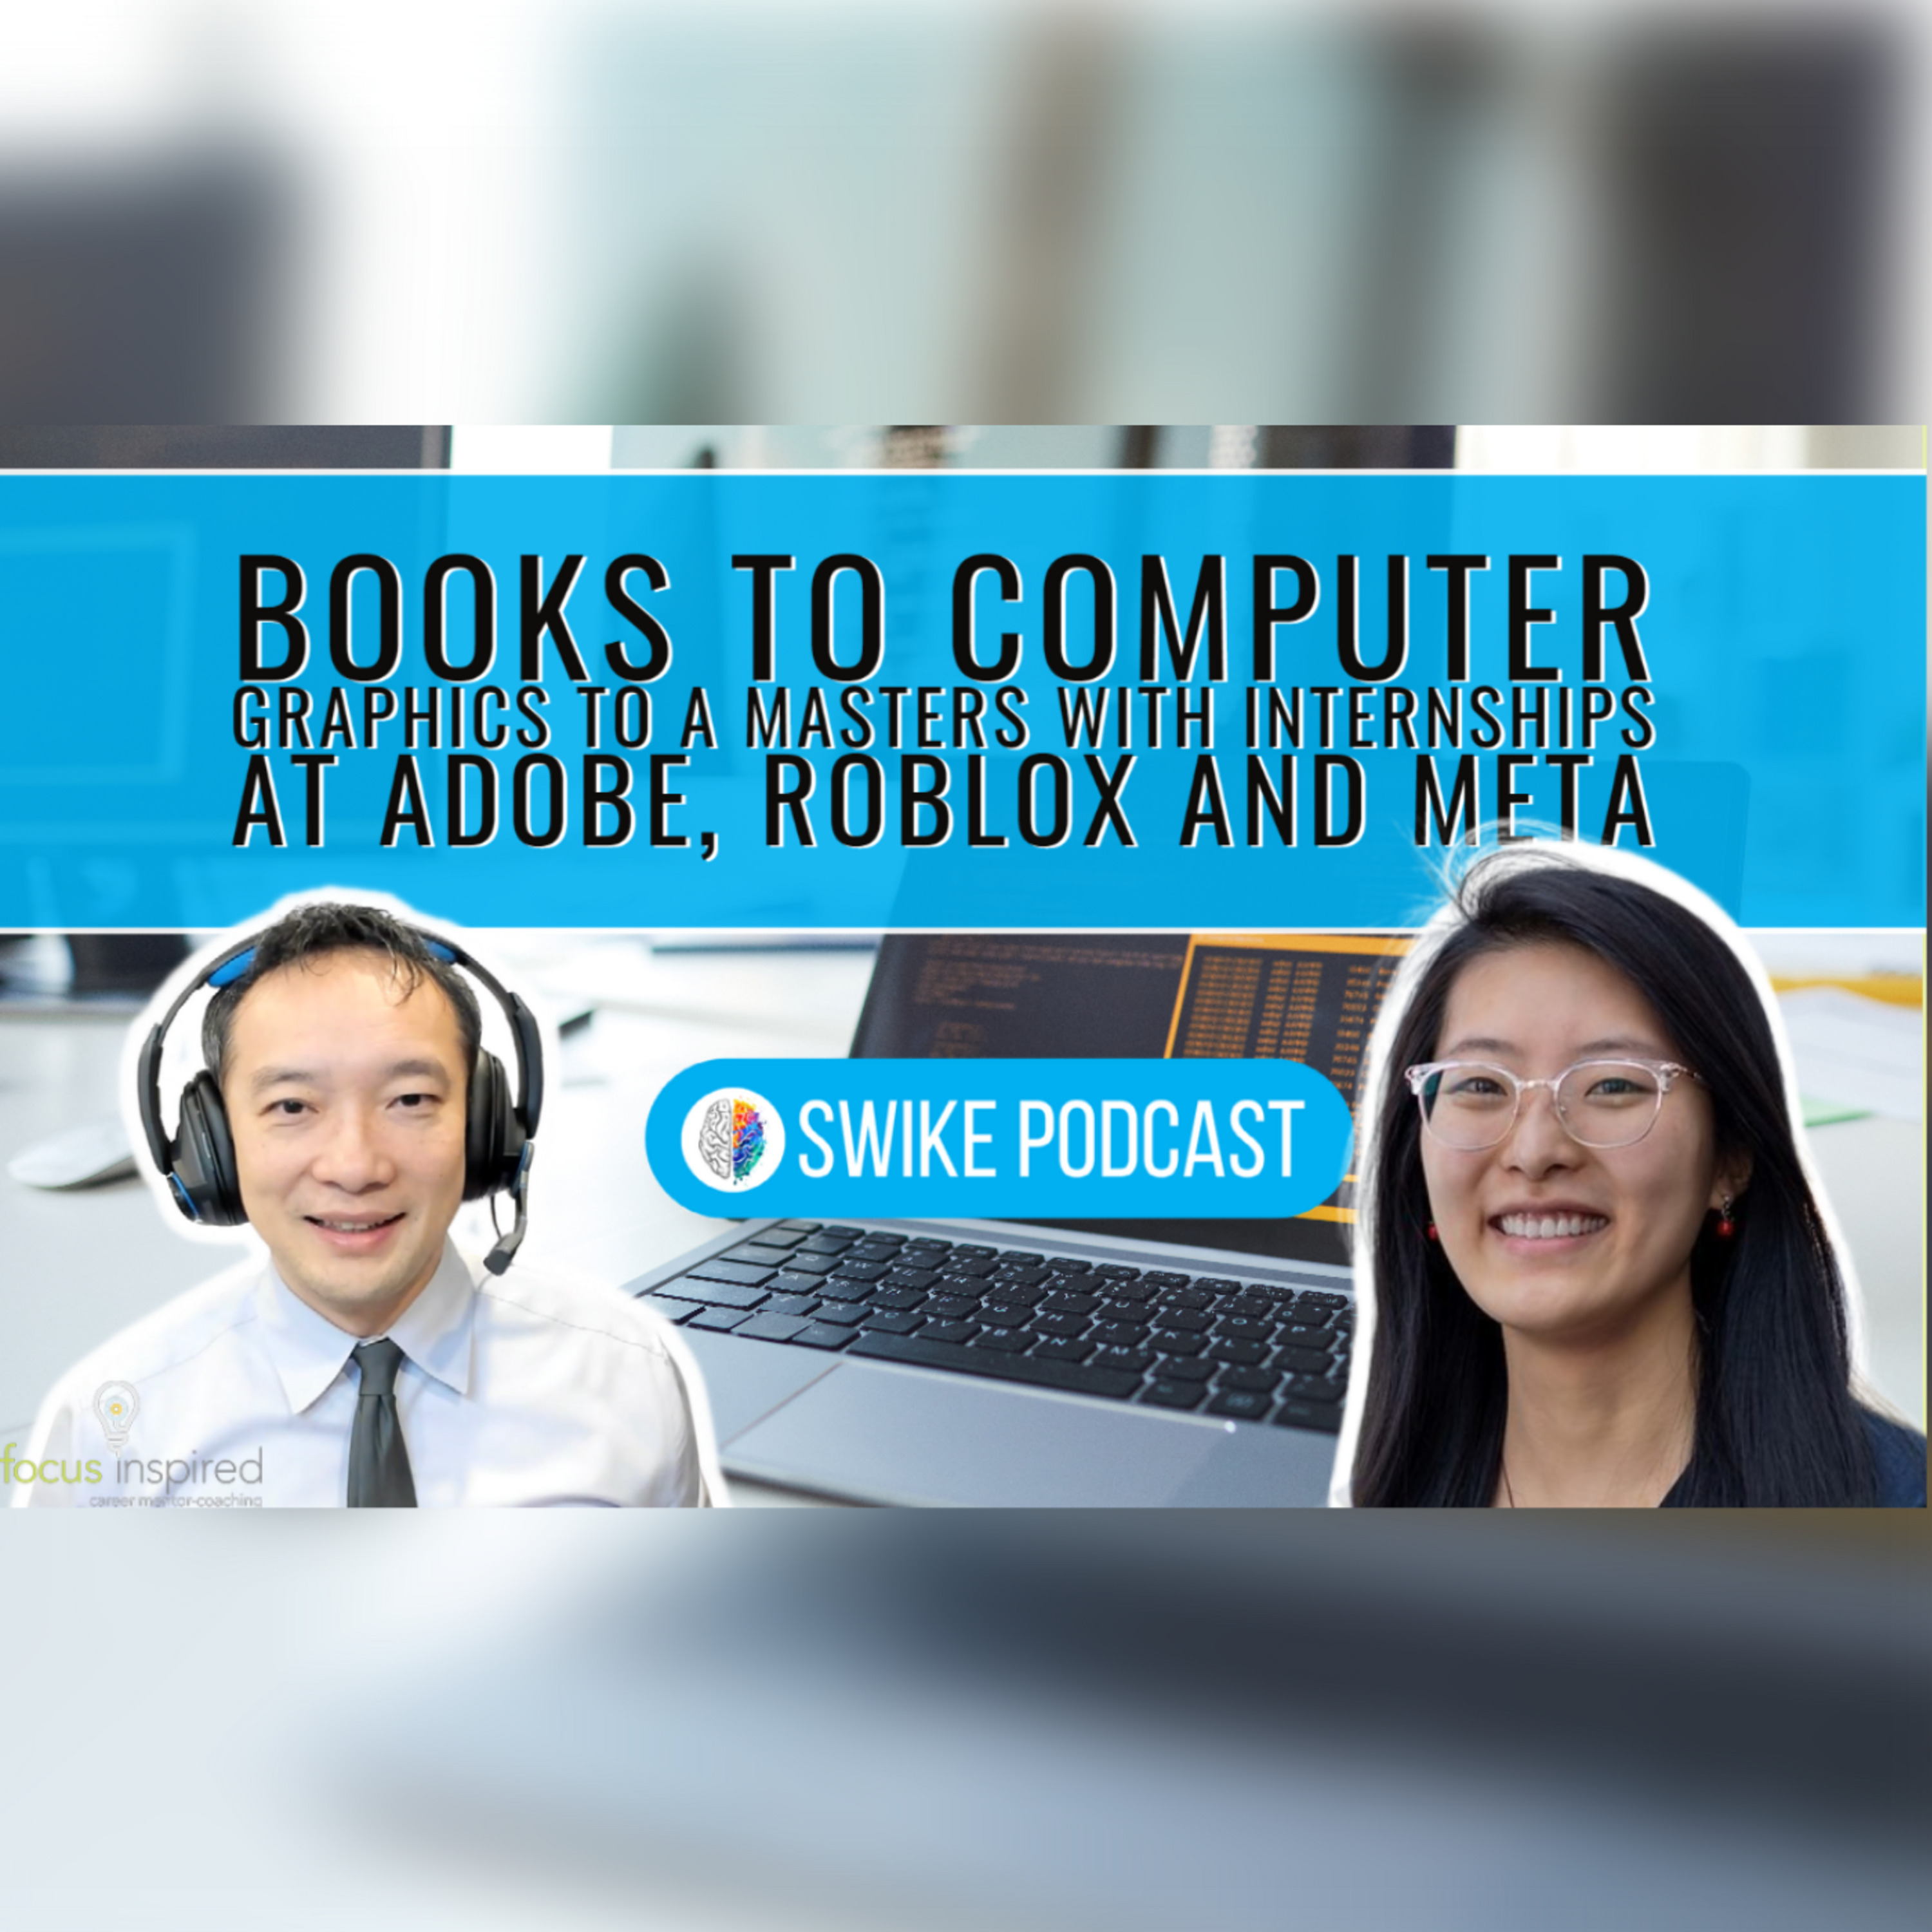 From Reading to Research: A master’s with internships at Adobe, Roblox, and Meta | Cheryl Lao CL-001